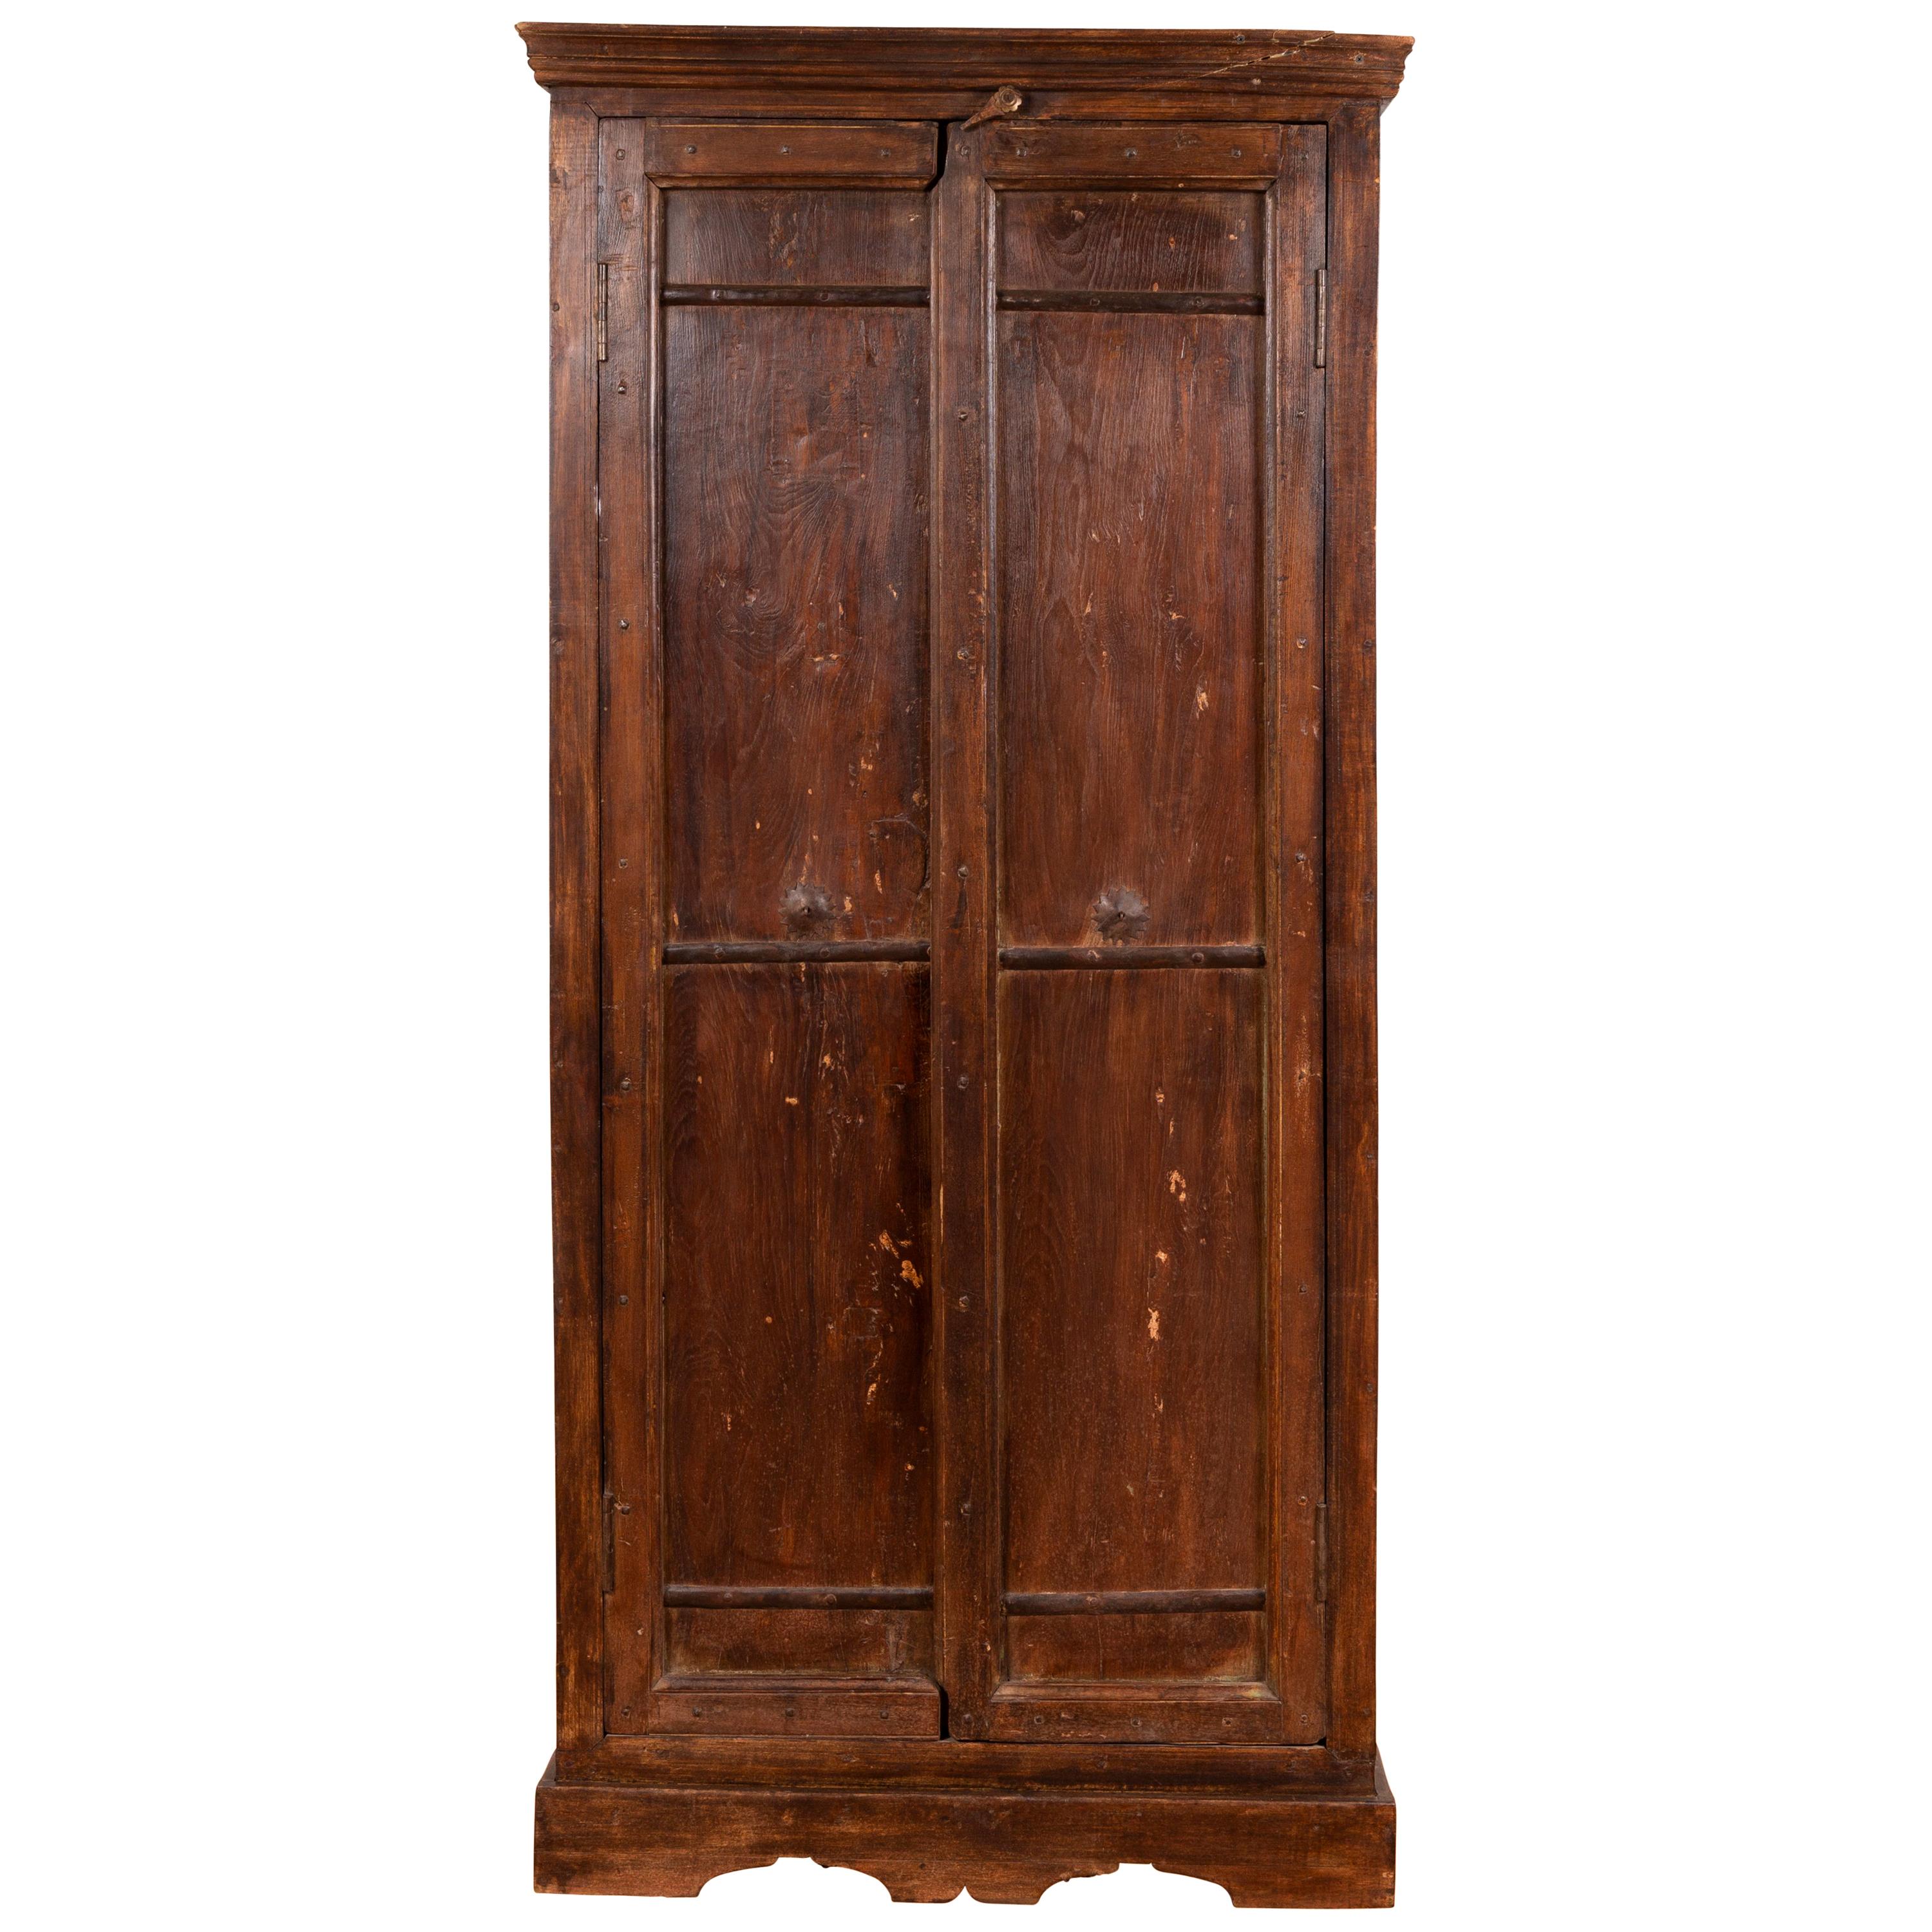 Indian Antique Wooden Armoire with Paneled Doors, Metal Braces and Aged Patina